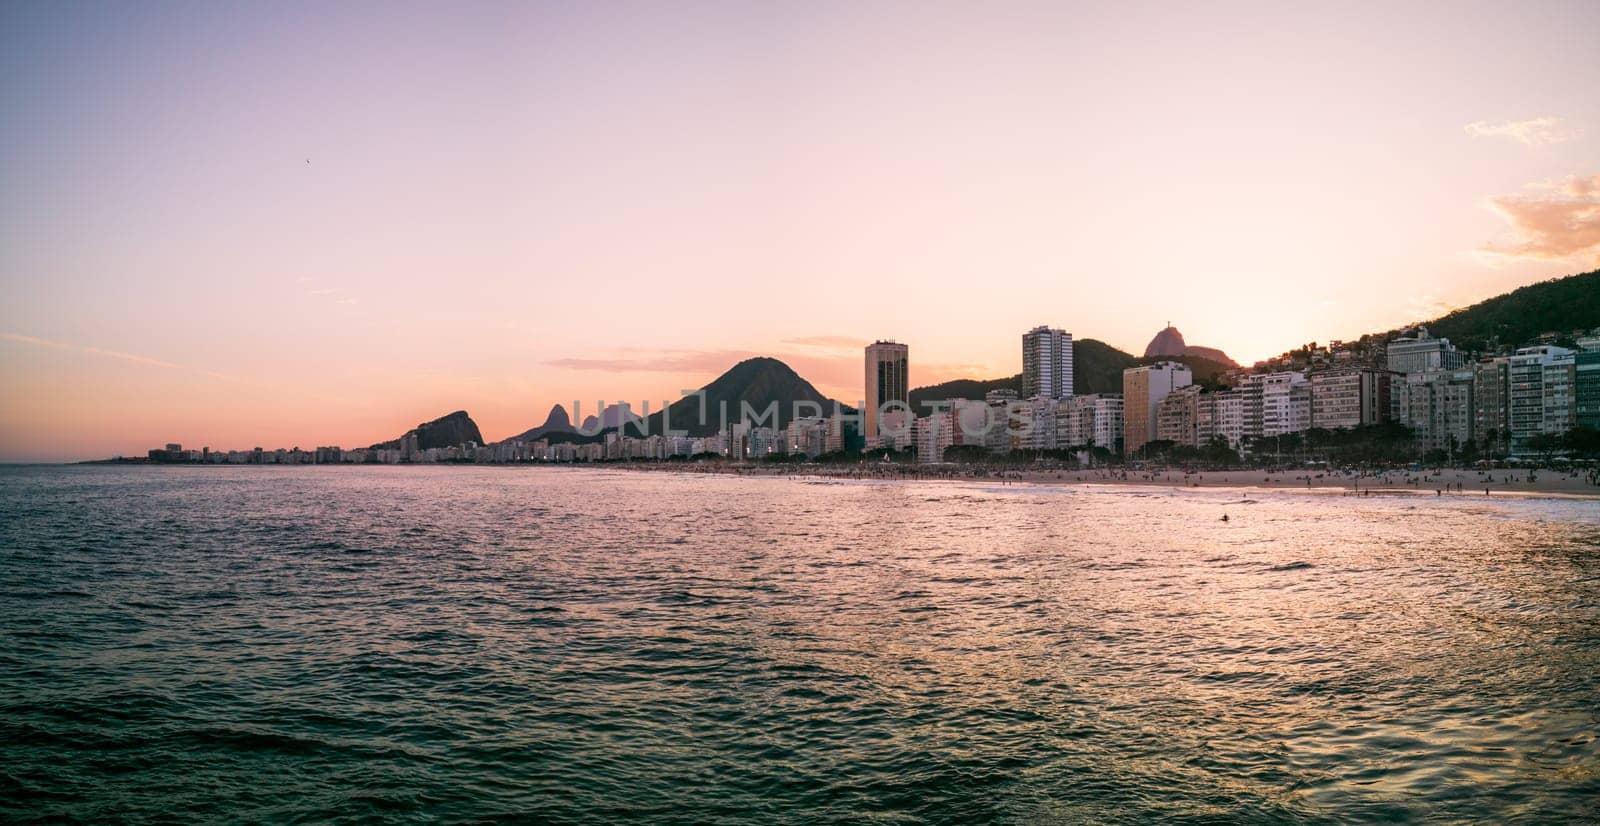 Copacabana beach at dusk featuring city lights and mountain outlines.